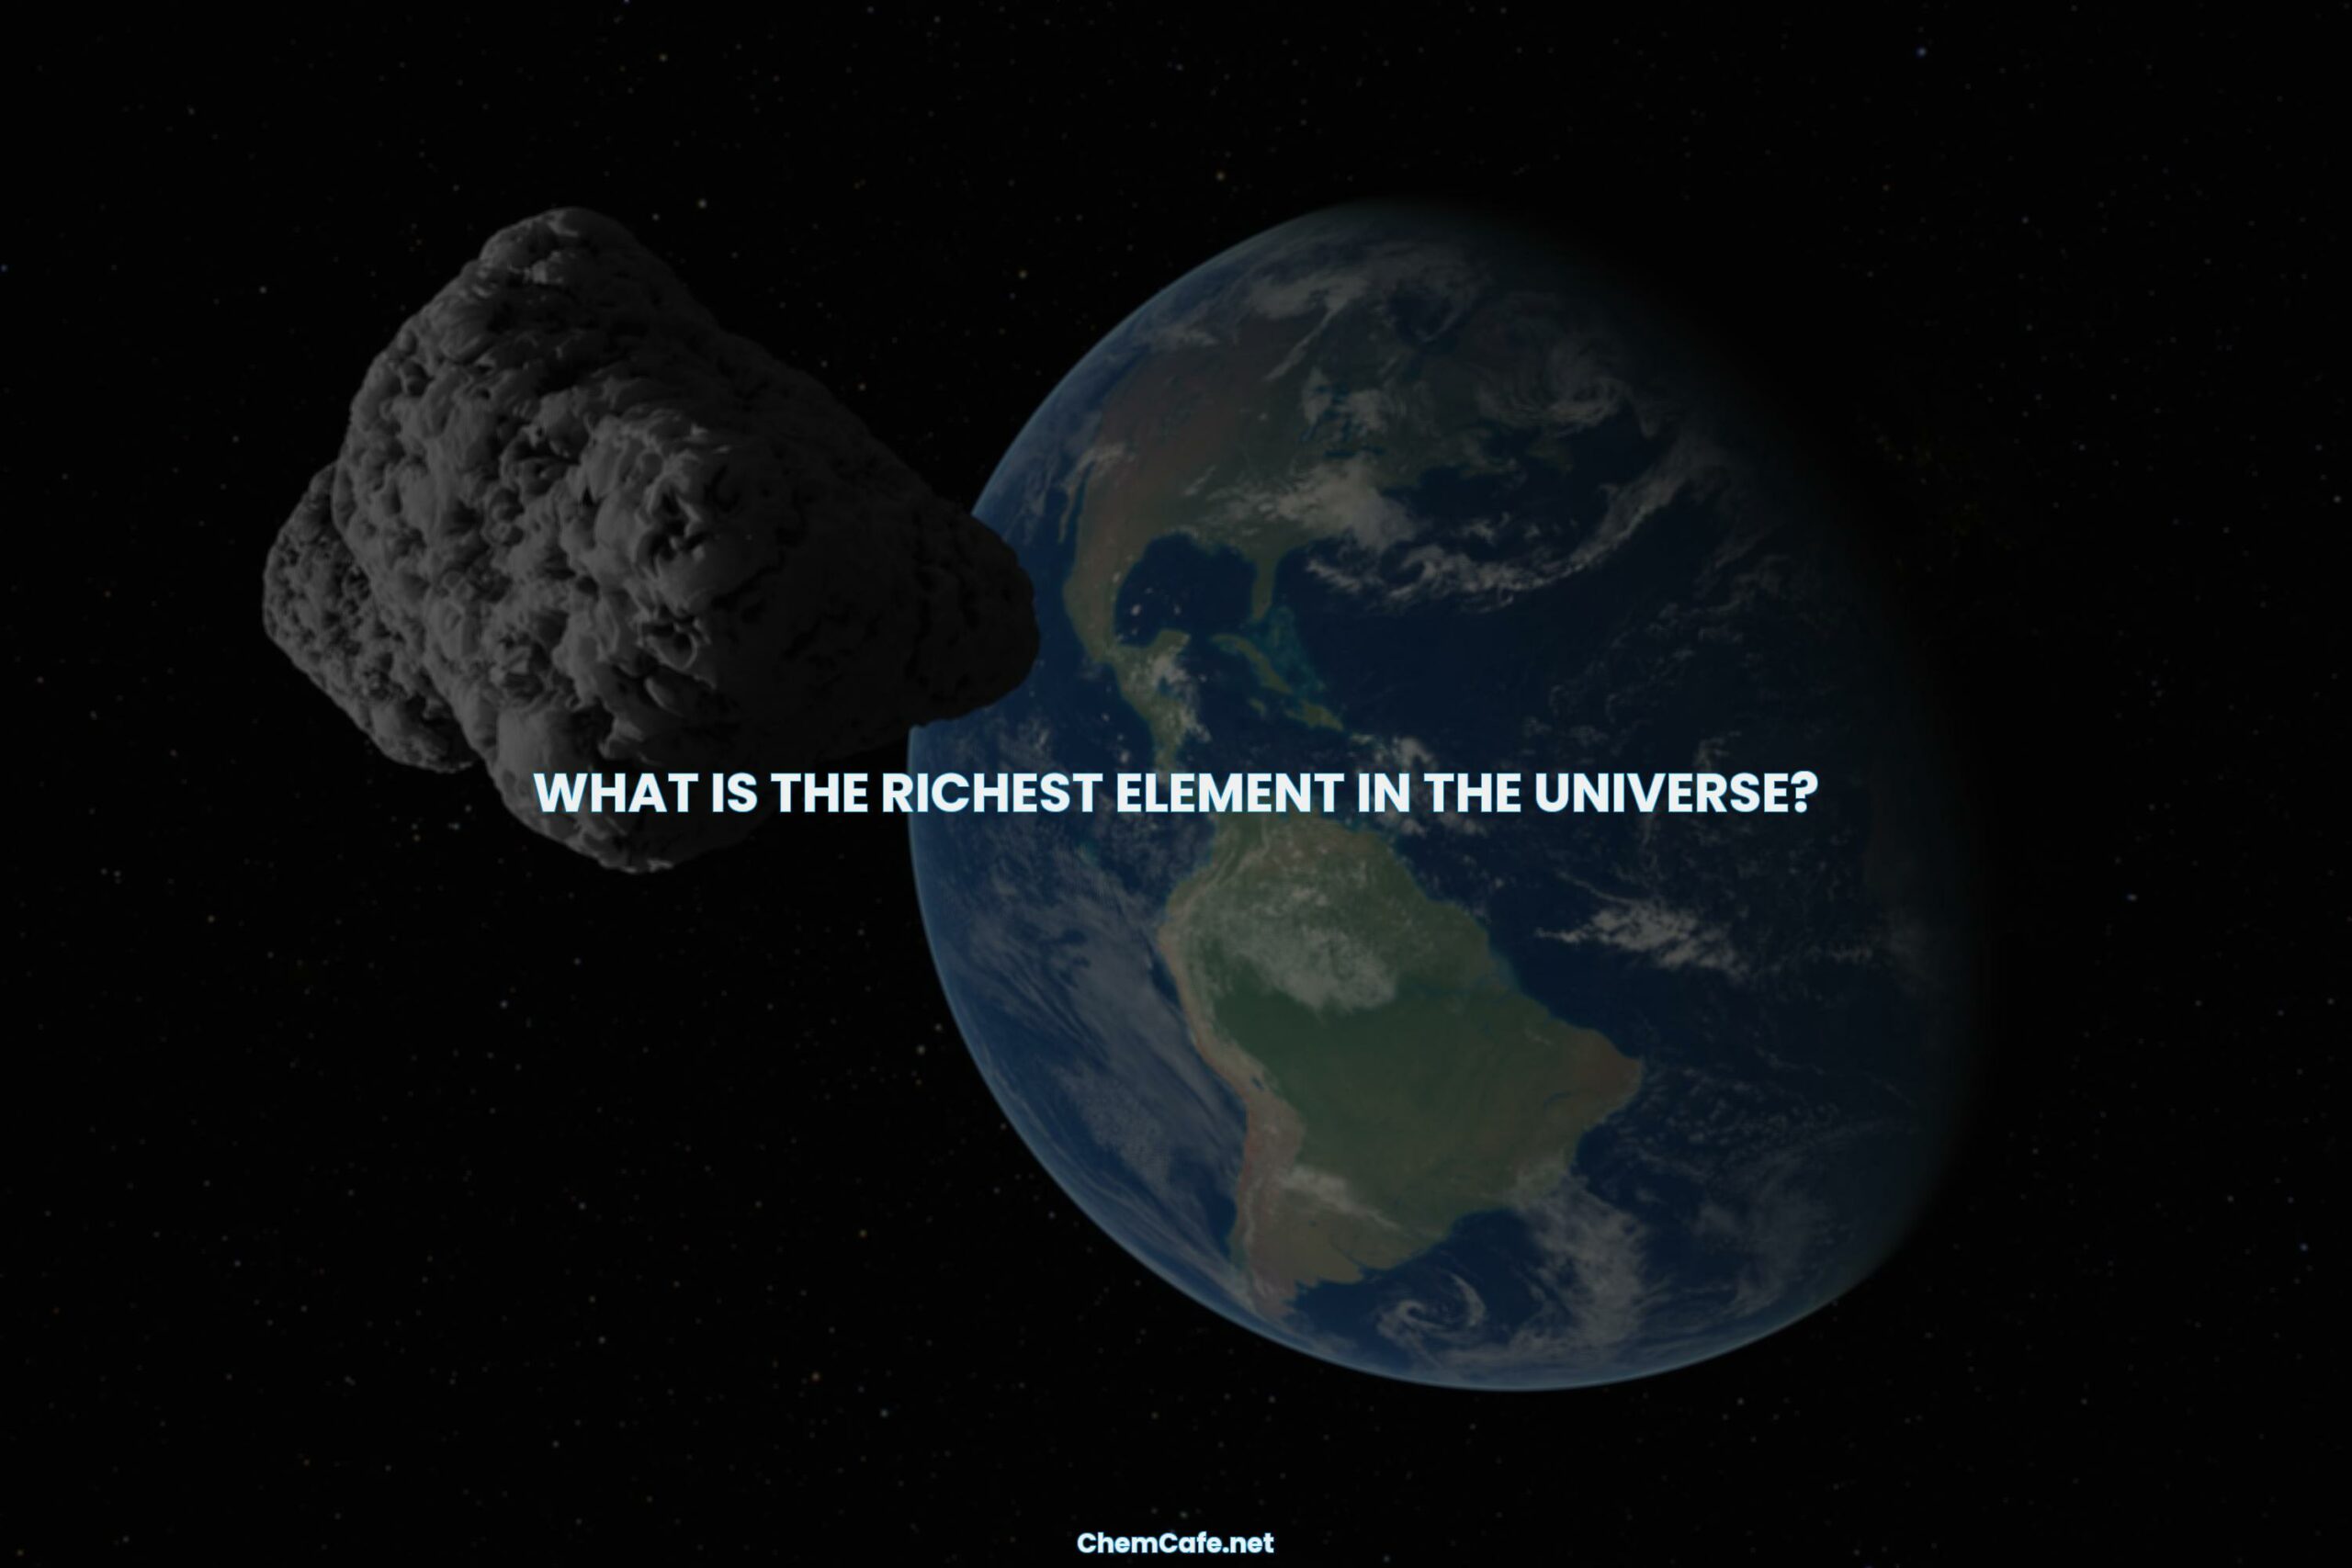 what is the richest element in the universe?